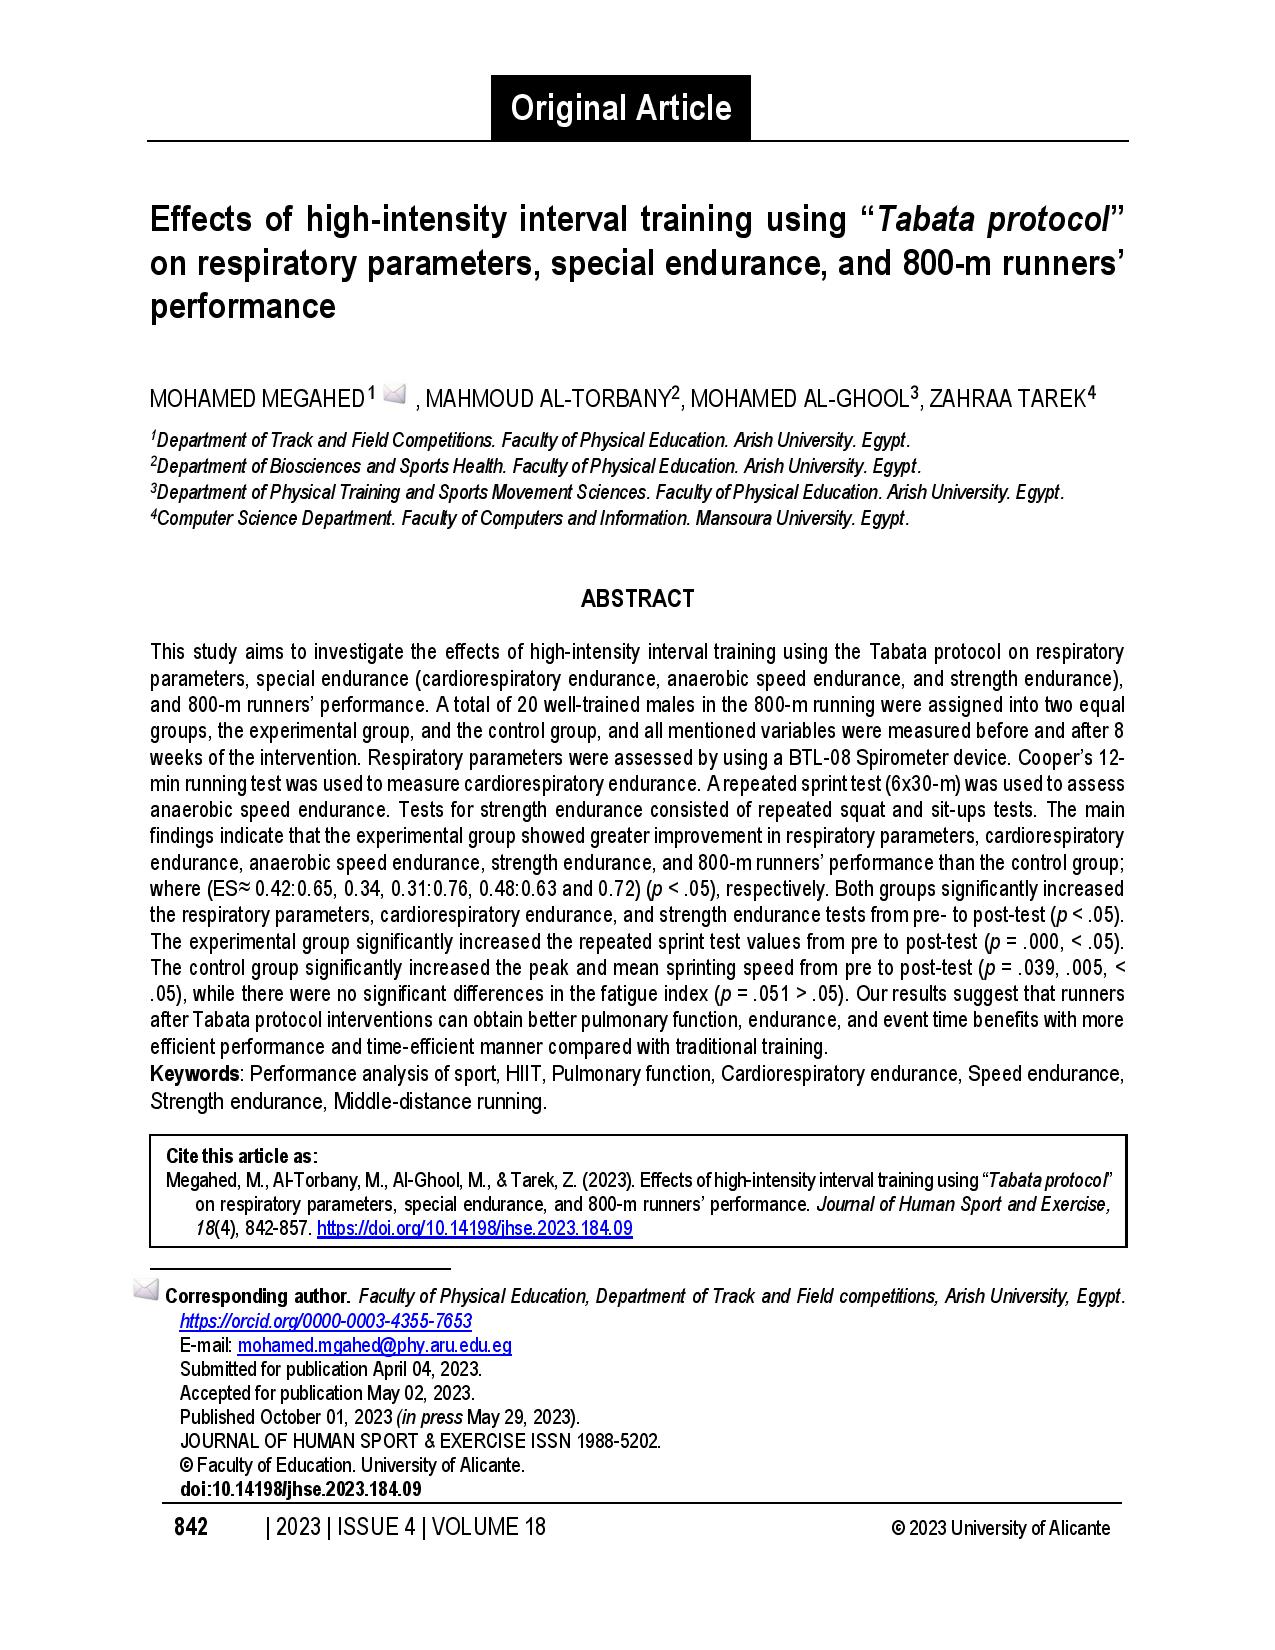 Effects of high-intensity interval training using “Tabata protocol” on respiratory parameters, special endurance, and 800-m runners’ performance